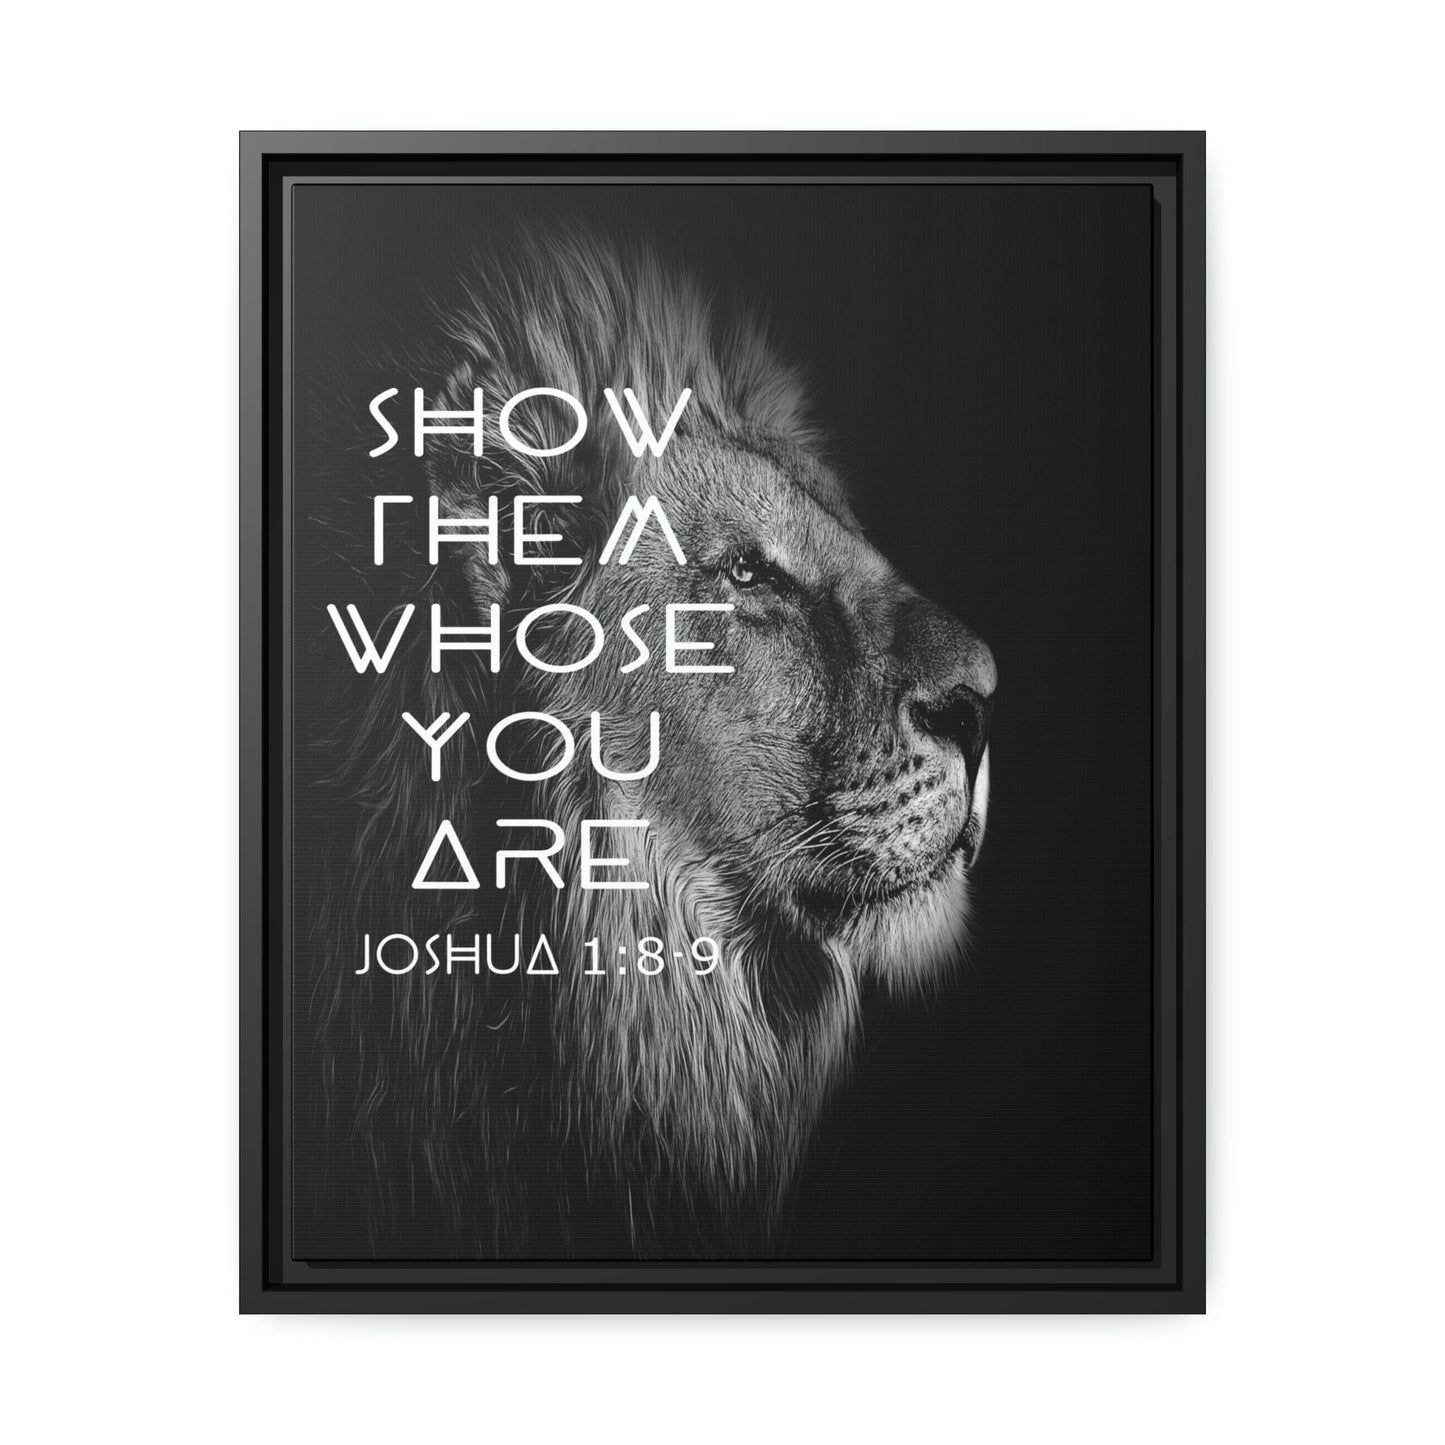 Printify Canvas 16″ x 20″ (Vertical) / Black / 1.25" Show Them Whose You Are - Joshua 1:8-9 Christian Canvas Wall Art